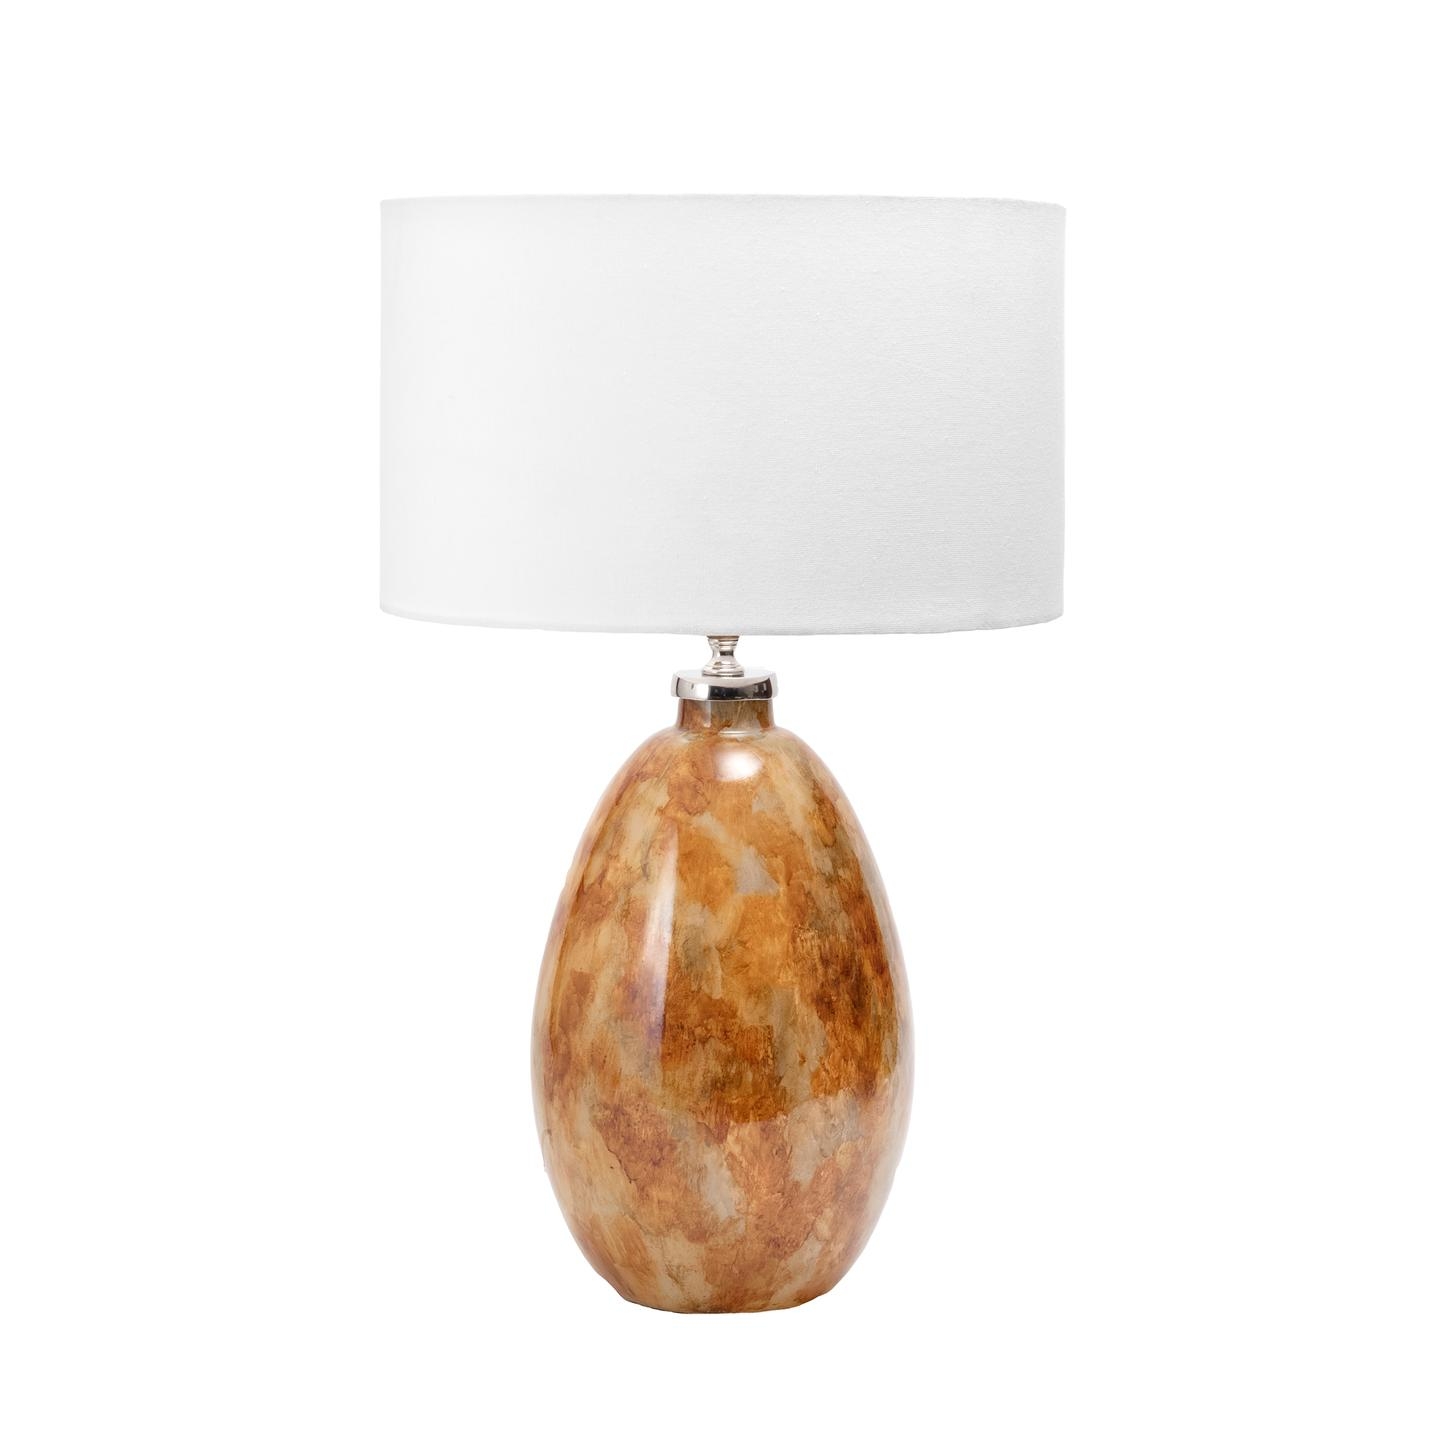 Clifton 22" Glass Table Lamp - Image 2